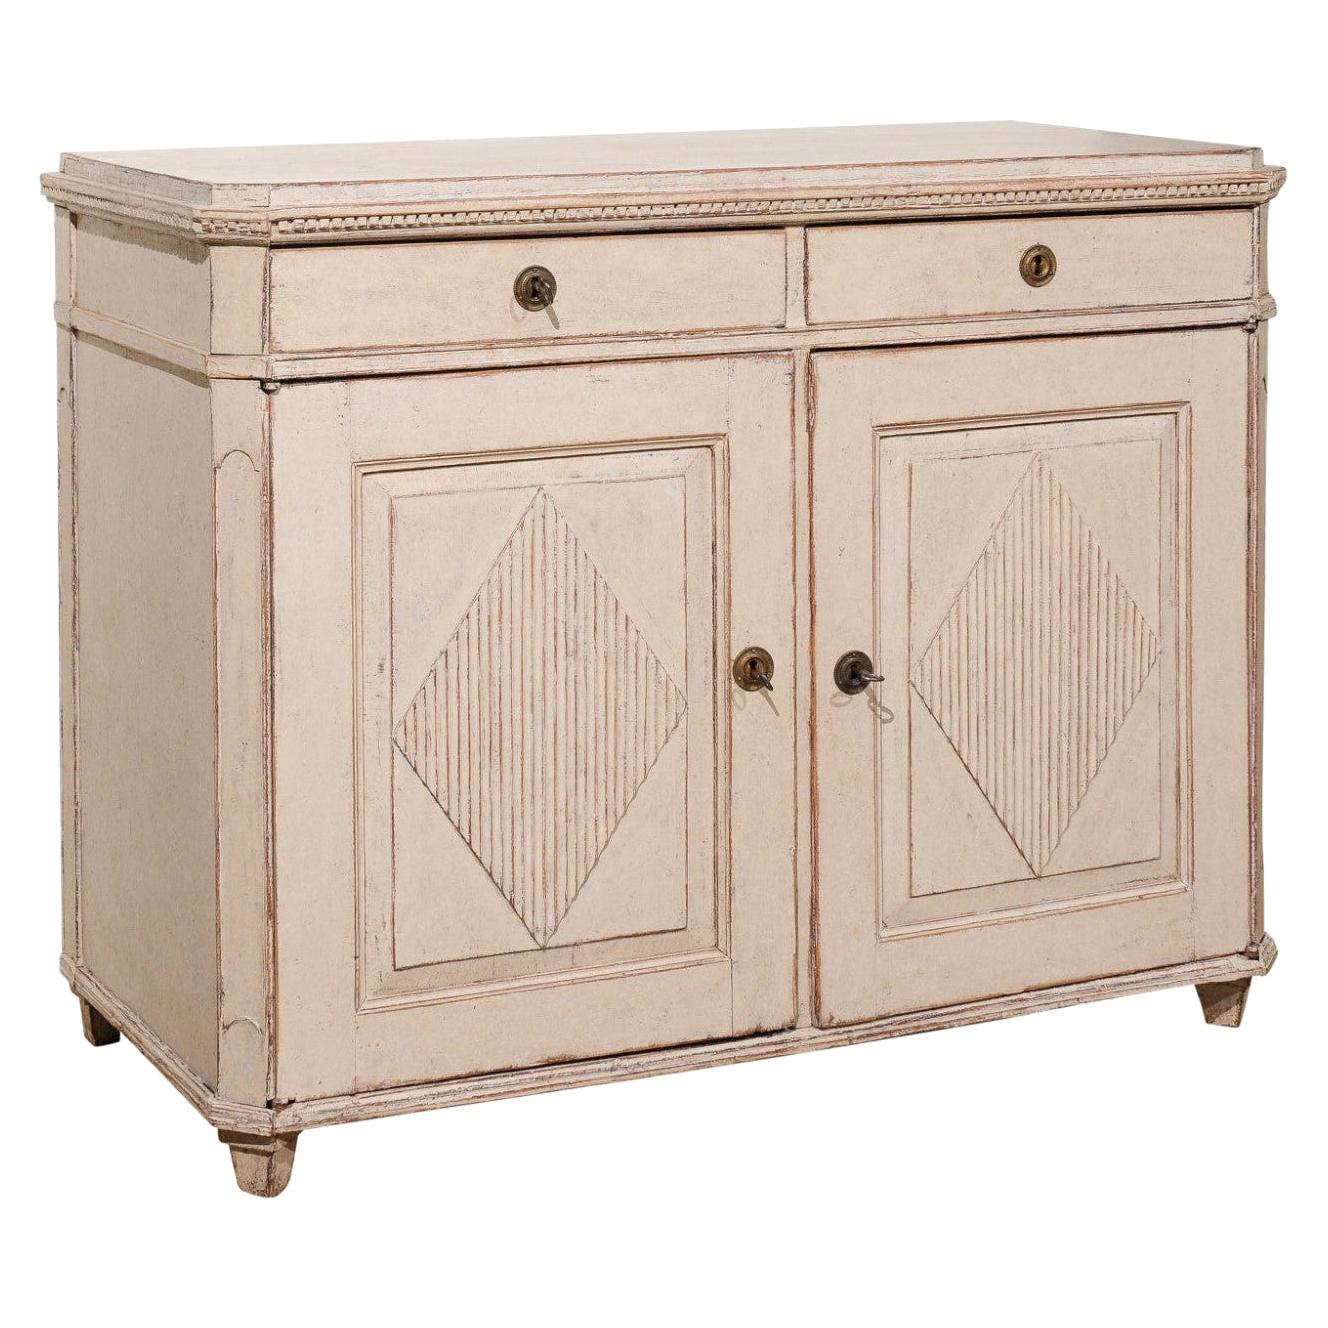 Sold Swedish Gustavian Painted Buffet with Diamond Motifs and Canted Side Posts